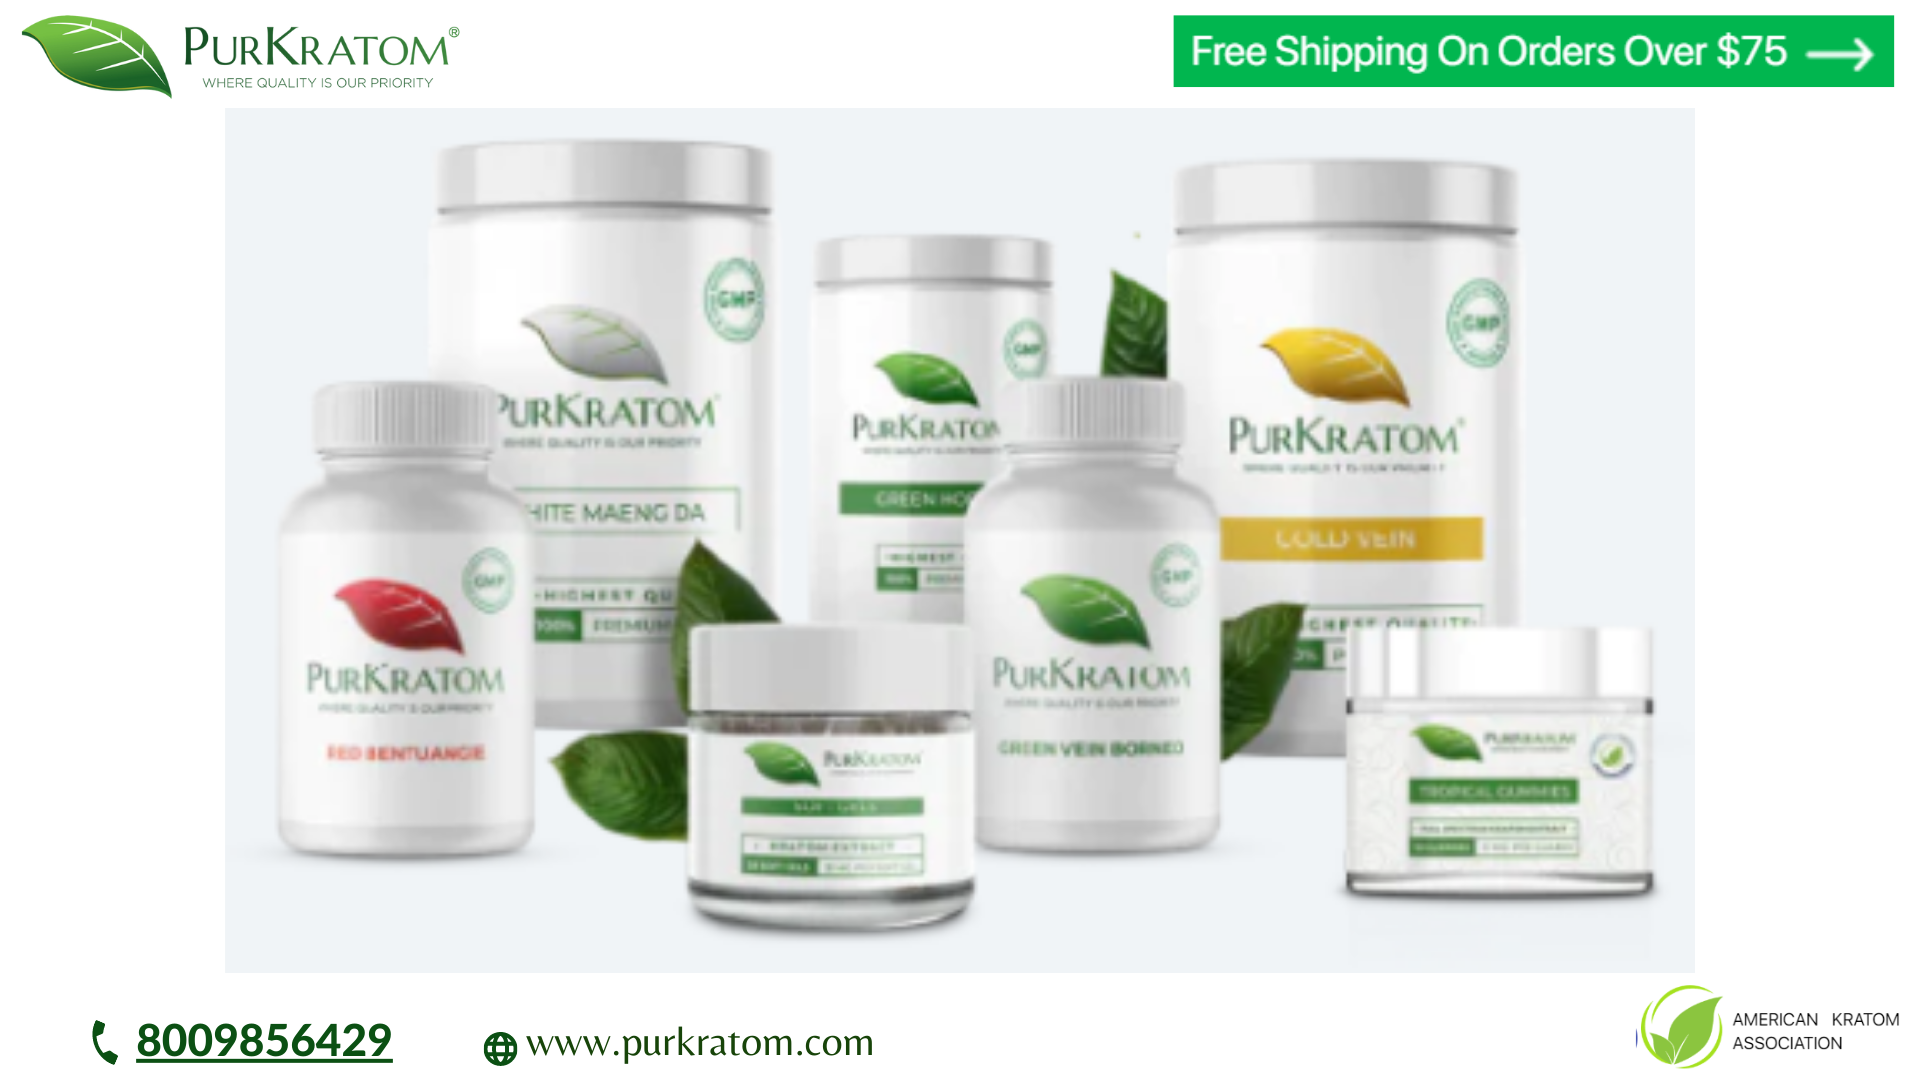 Elevate Your Day with PURKRATOM’s GMP-Certified Green Kratom Powder and Variety Pack